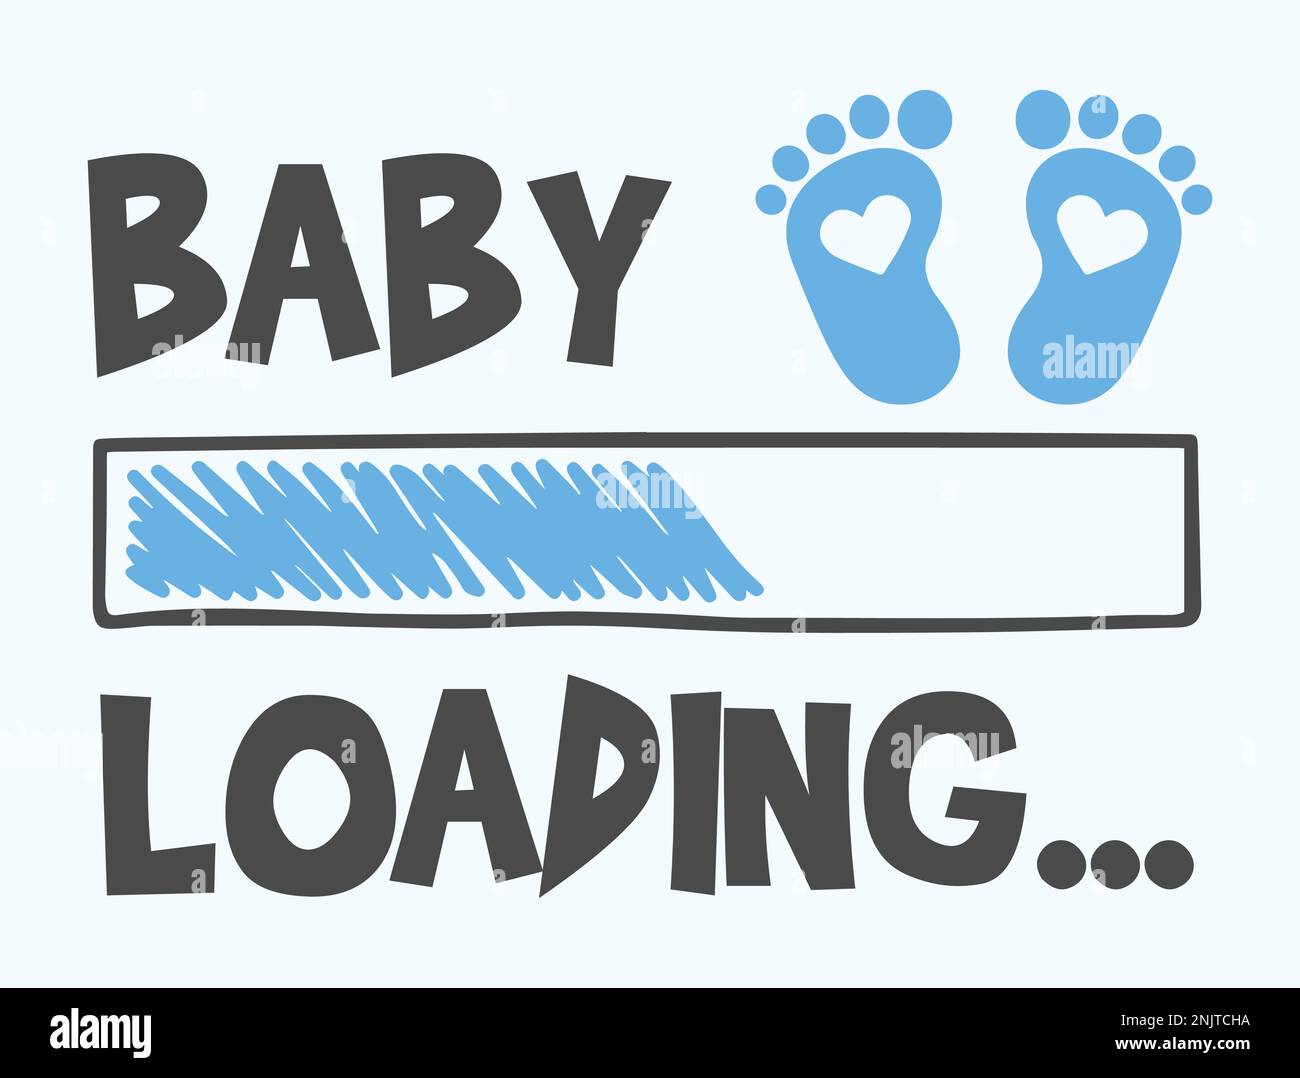 Baby Boy Is Loading. Lettering with download bar and baby footprint. Vector illustration for t-shirt design, poster, card, baby shower decoration. Stock Vector